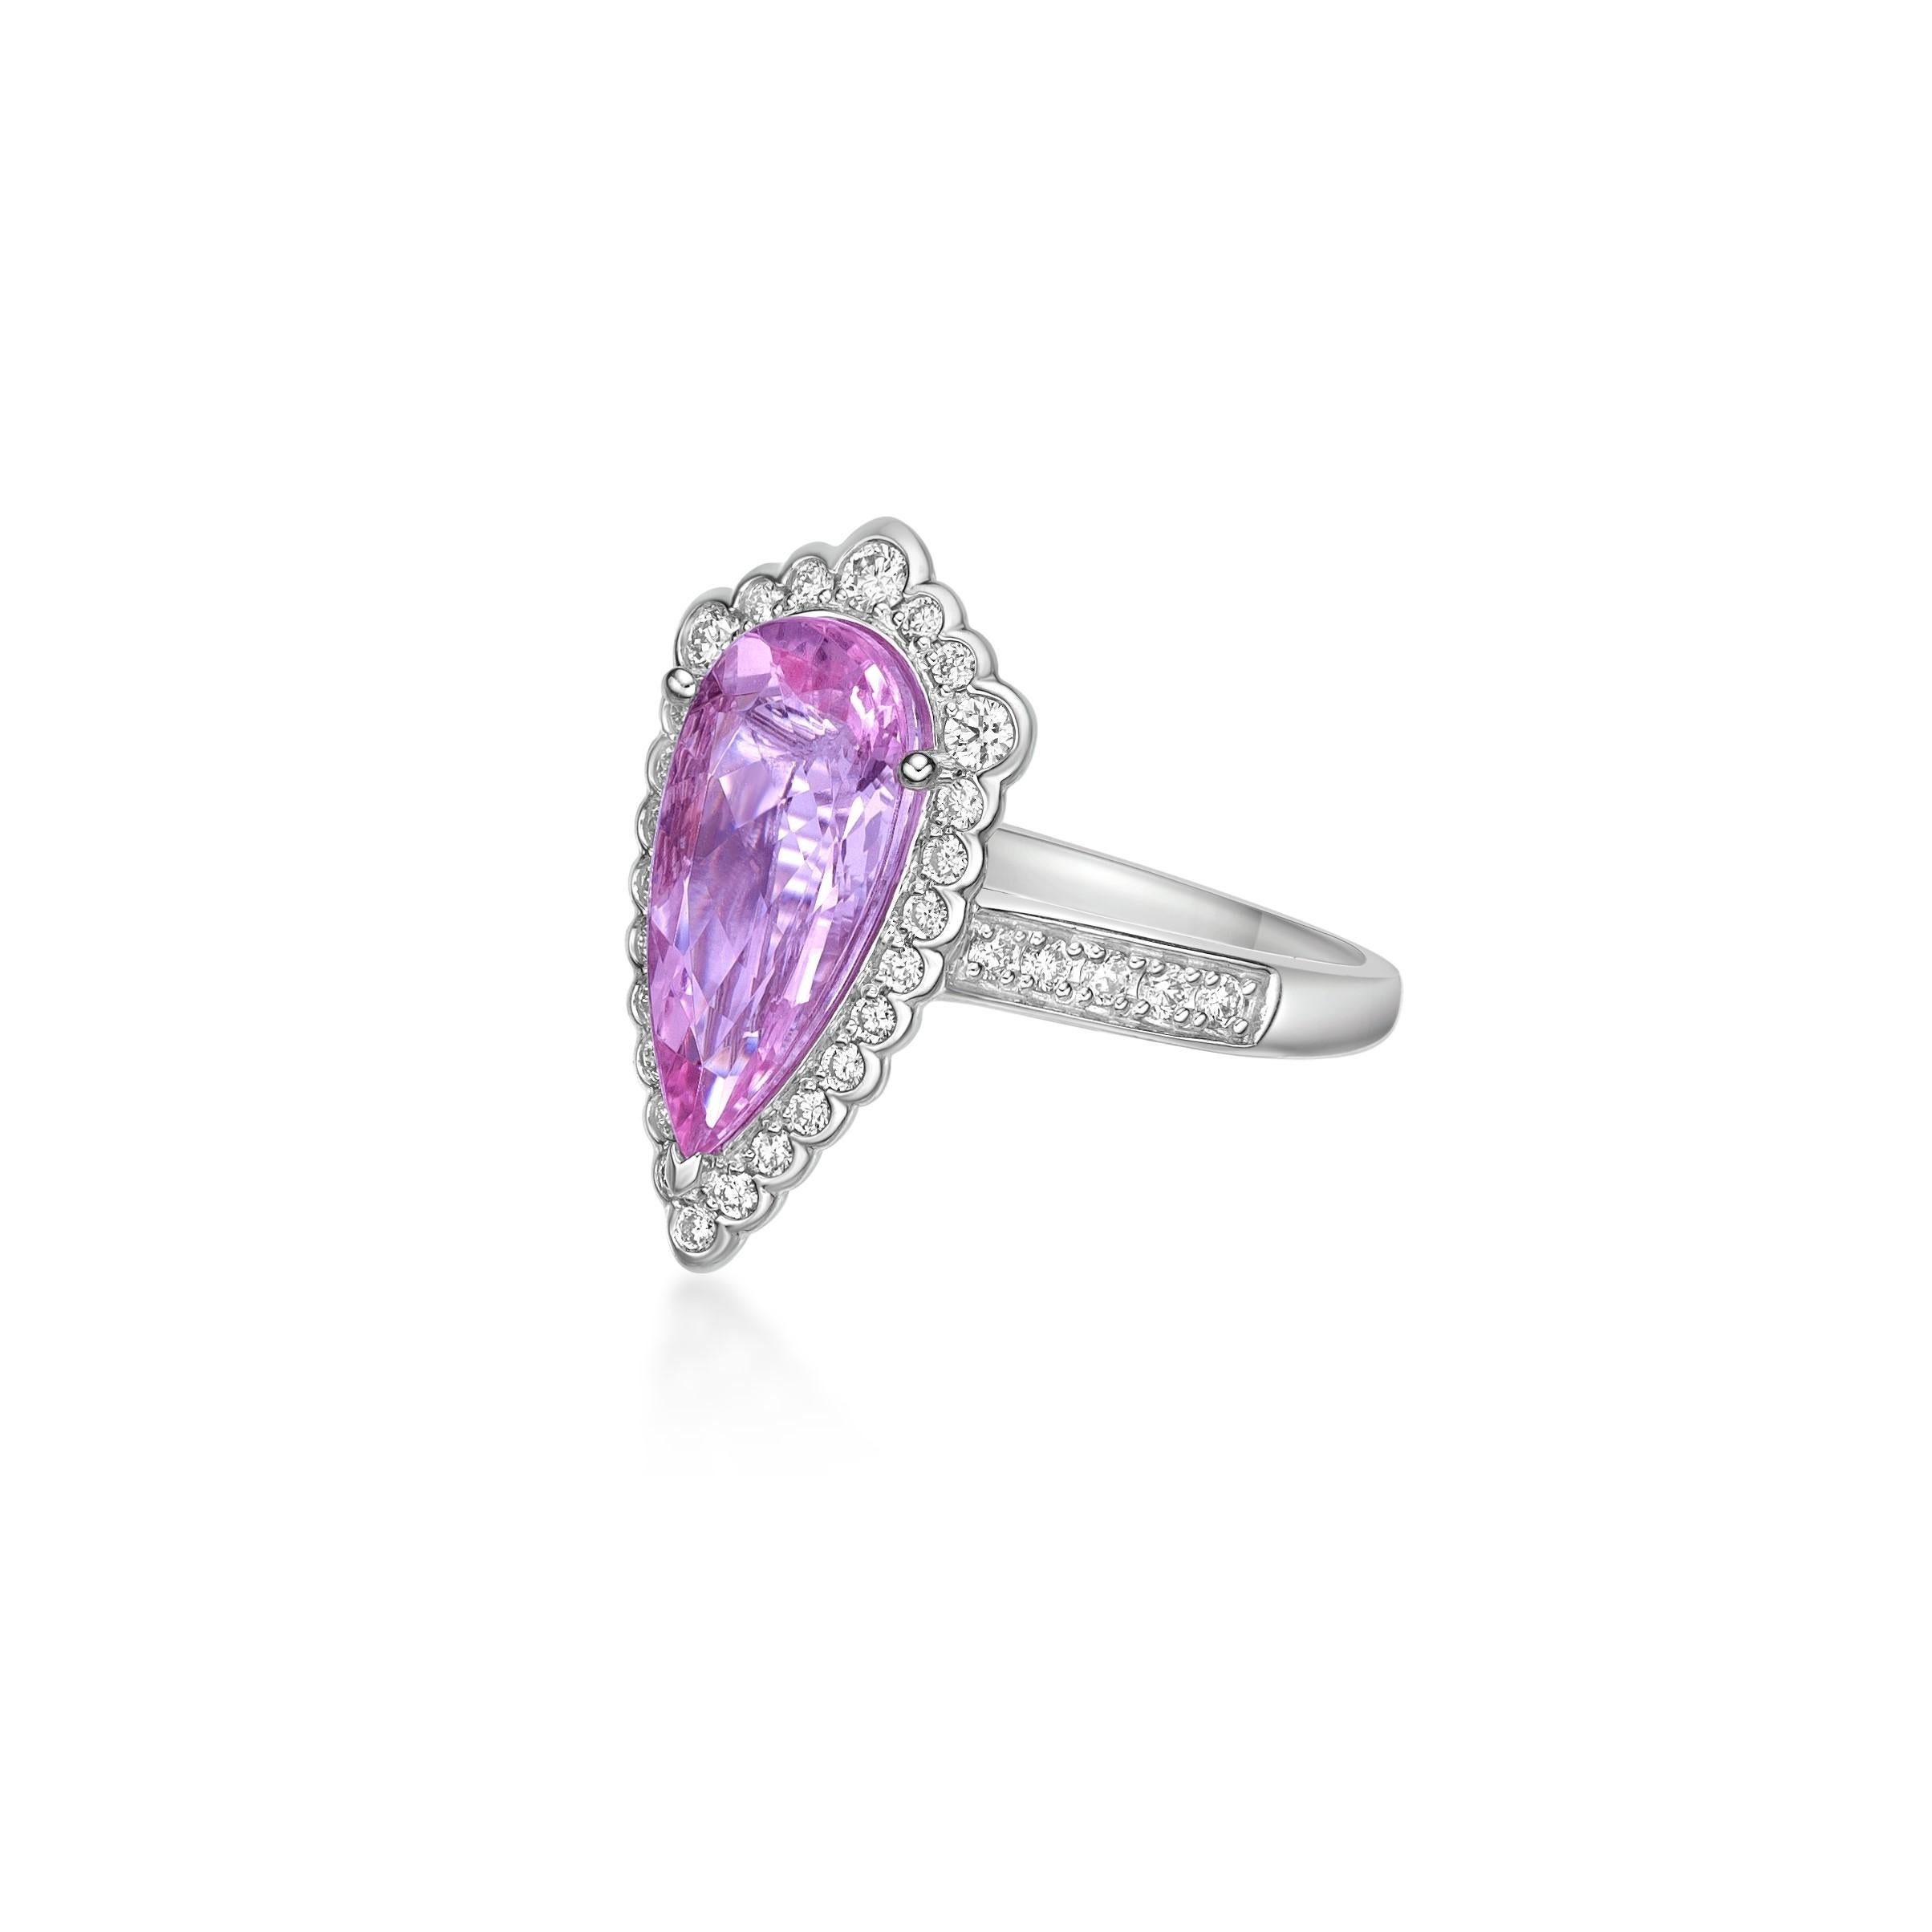 Pear Cut 2.79 Carat Pink Morganite Fancy Ring in 18Karat White Gold with White Diamond.   For Sale